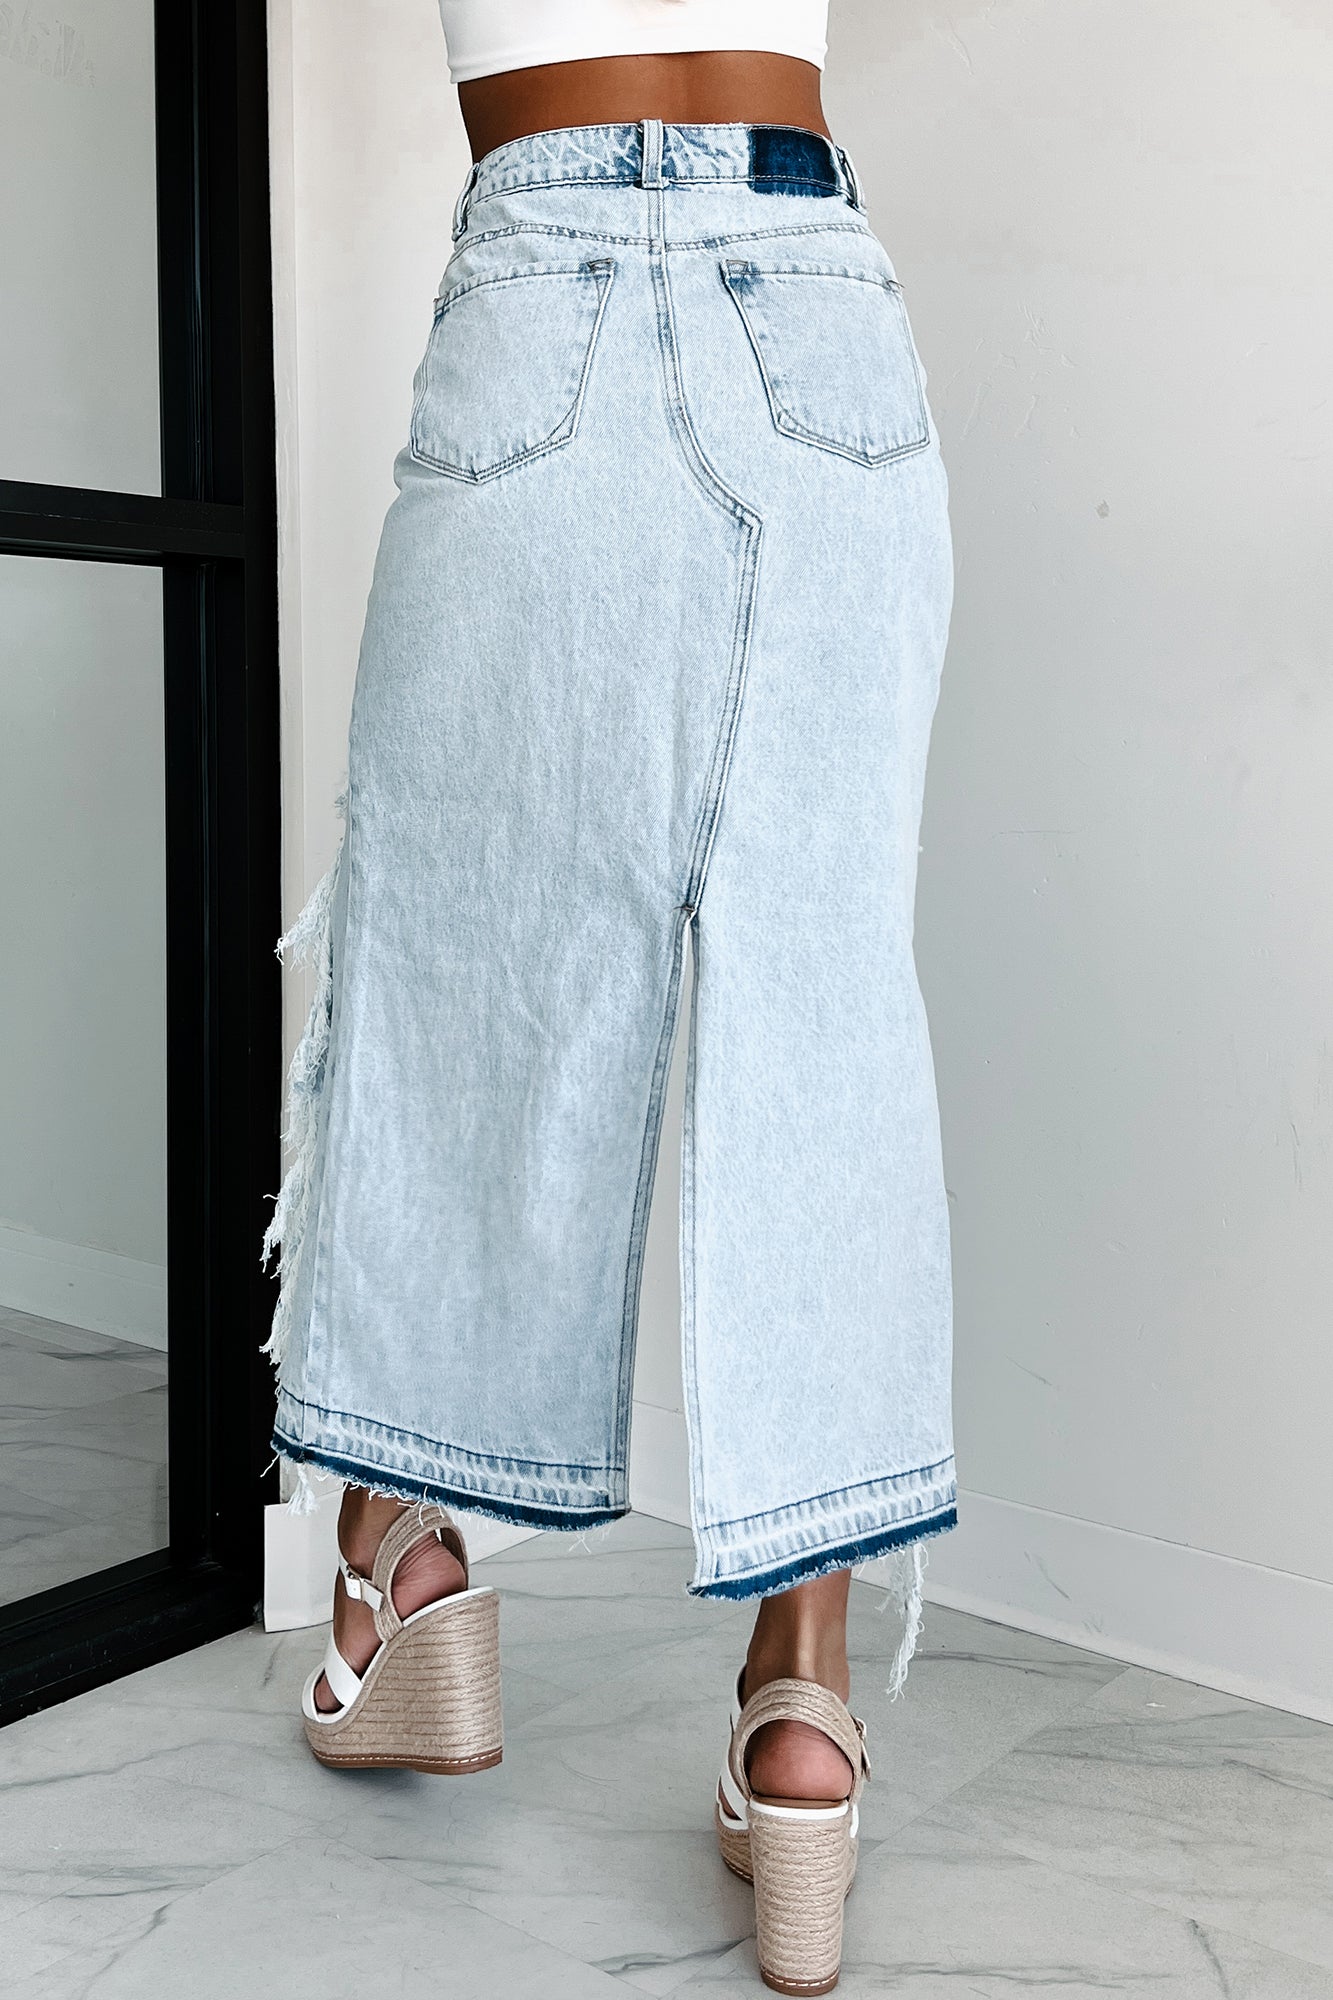 Style these 7 denim maxi skirts like your favourite Gen-Zs